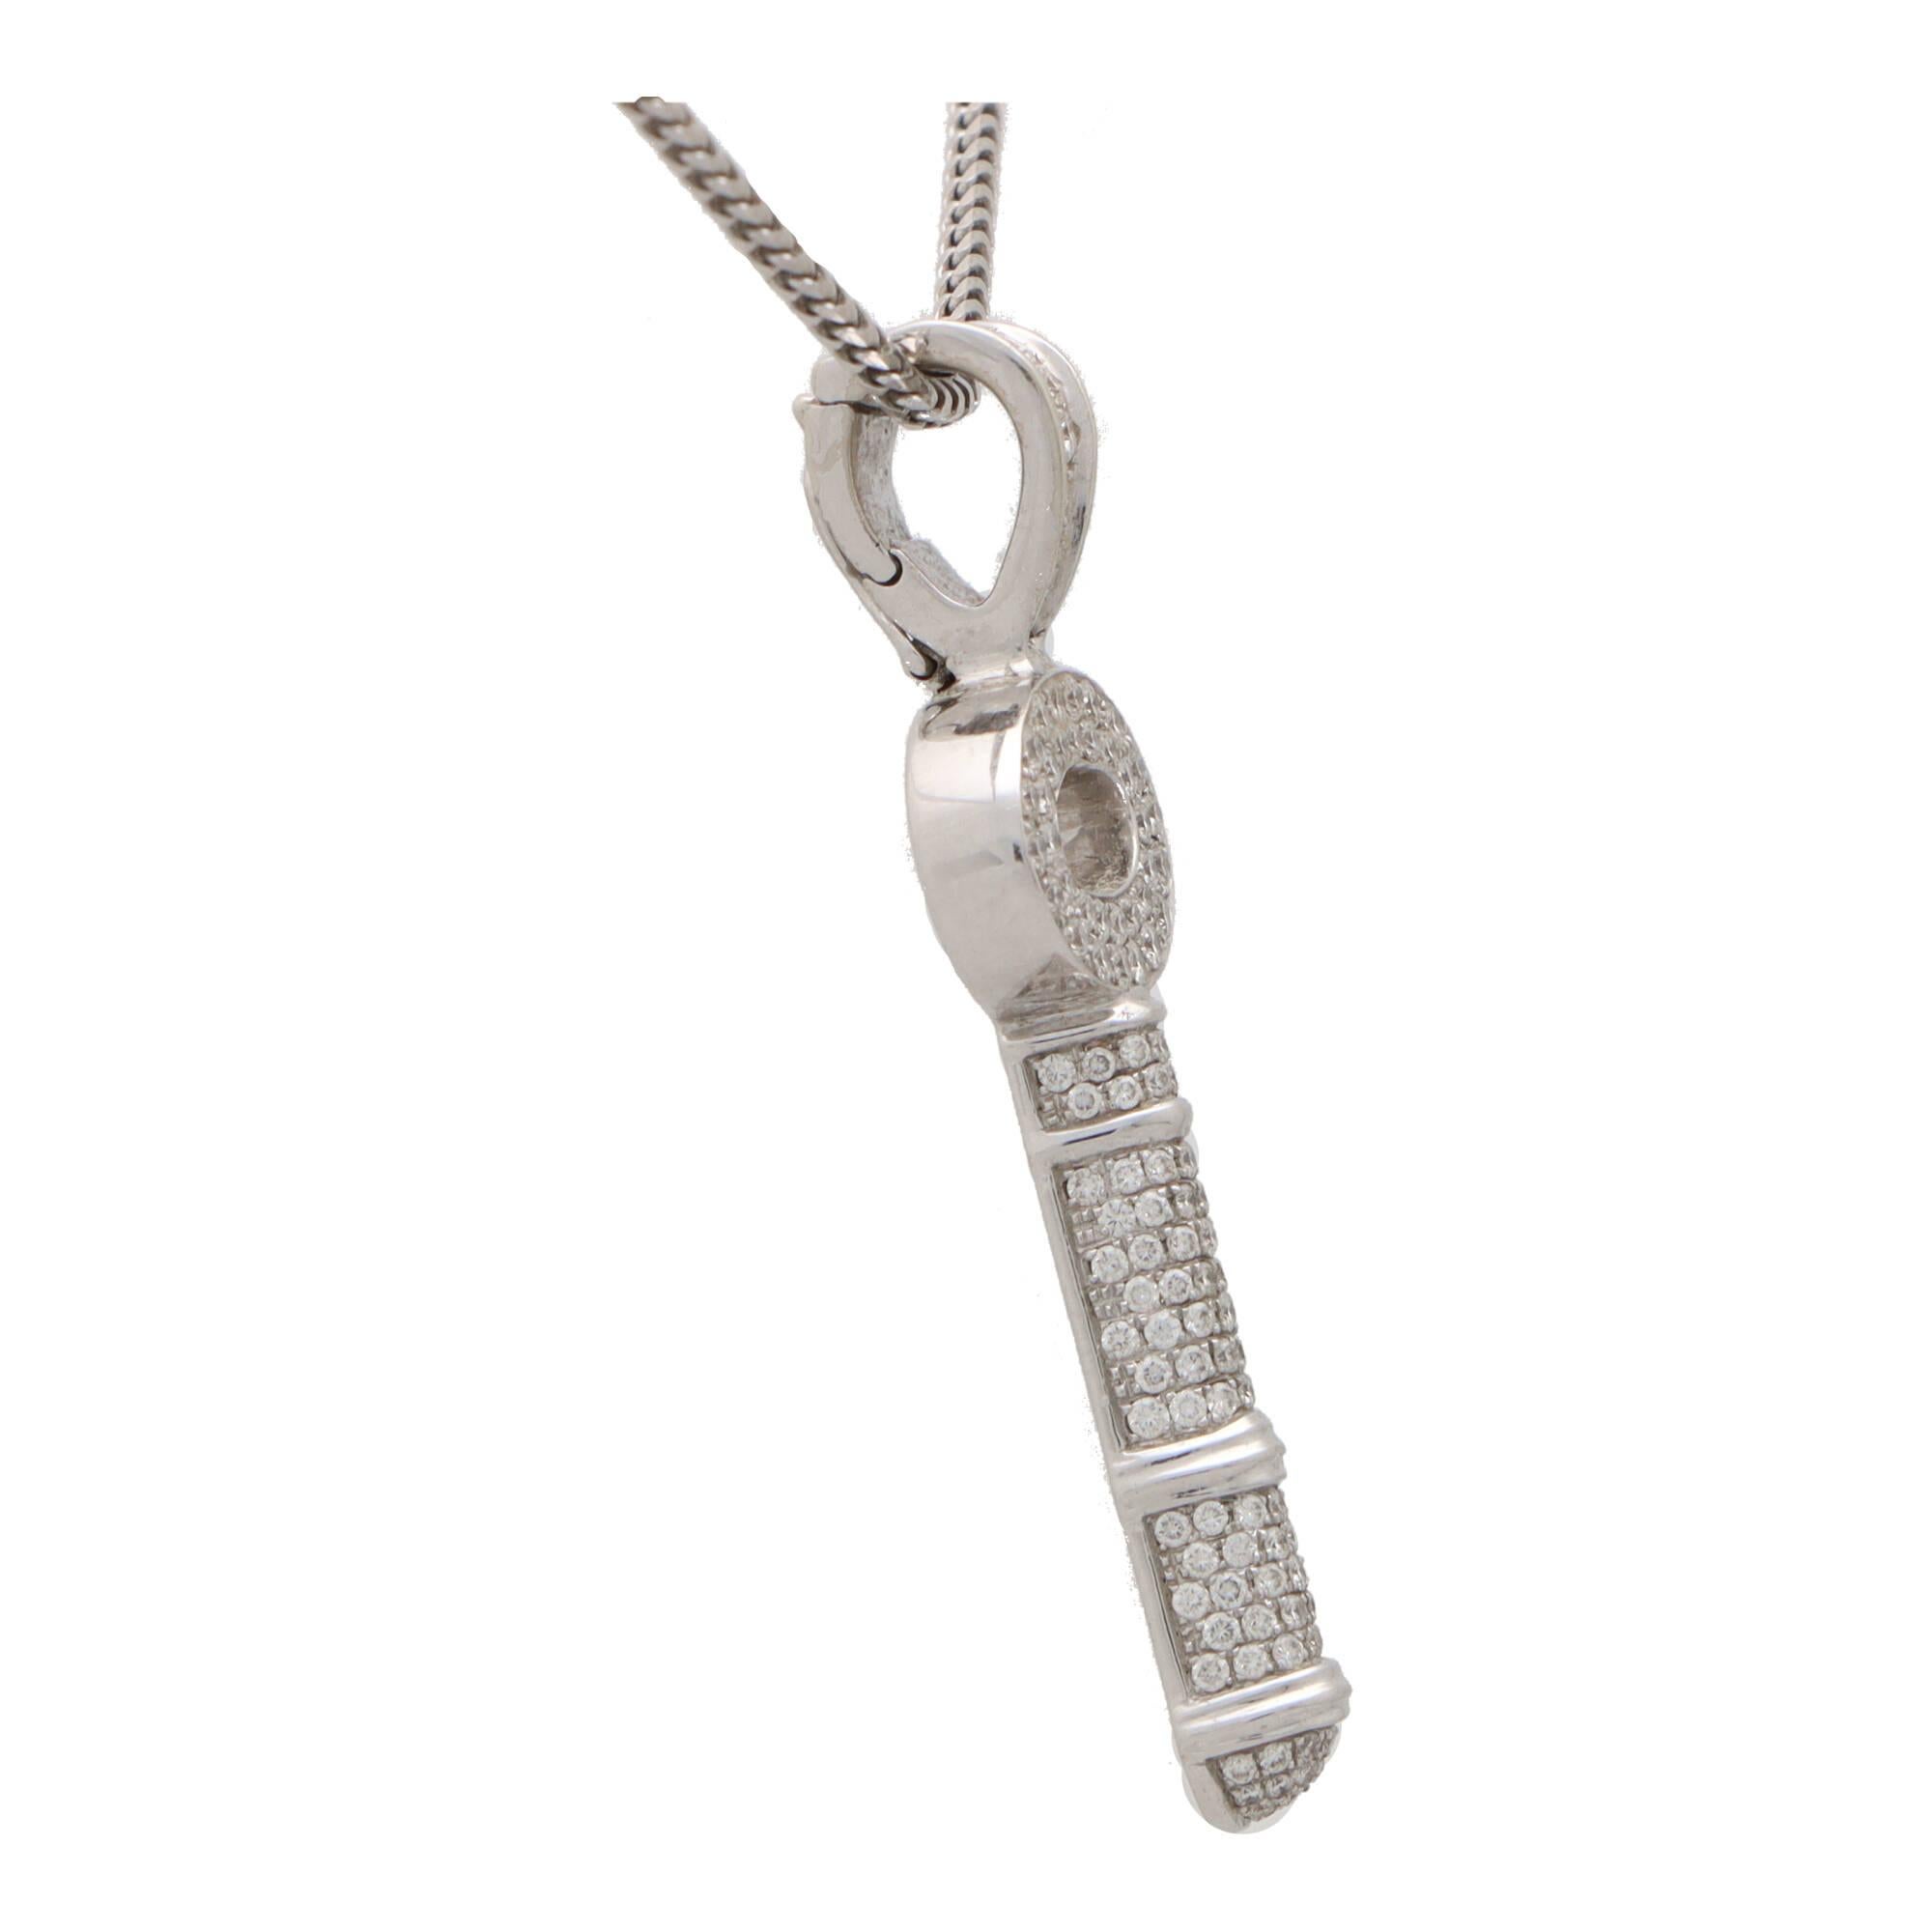 Modern  Vintage Theo Fennell Diamond Key Necklace Set in 18k White Gold For Sale